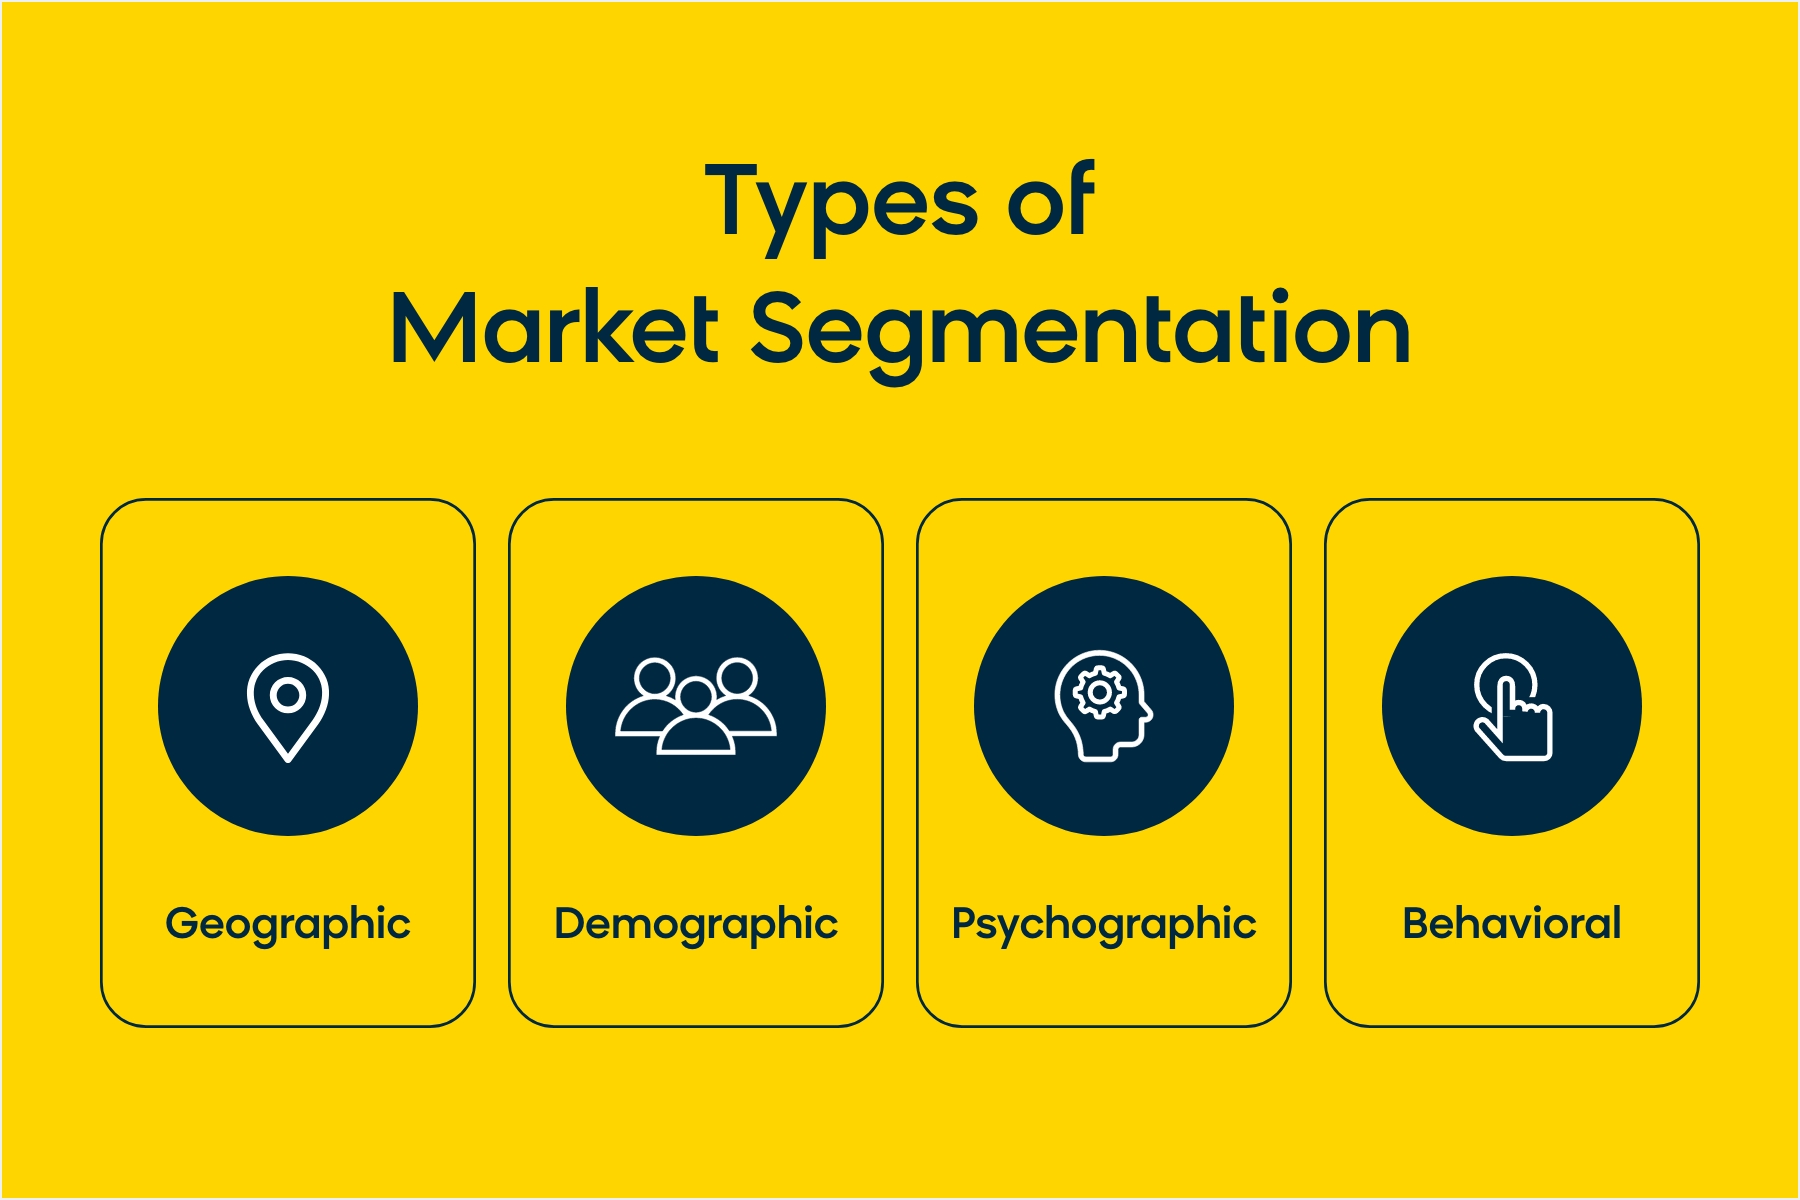 The Four Types of Customer Segmentation: geographic, demographic, psychographic, and behavioral